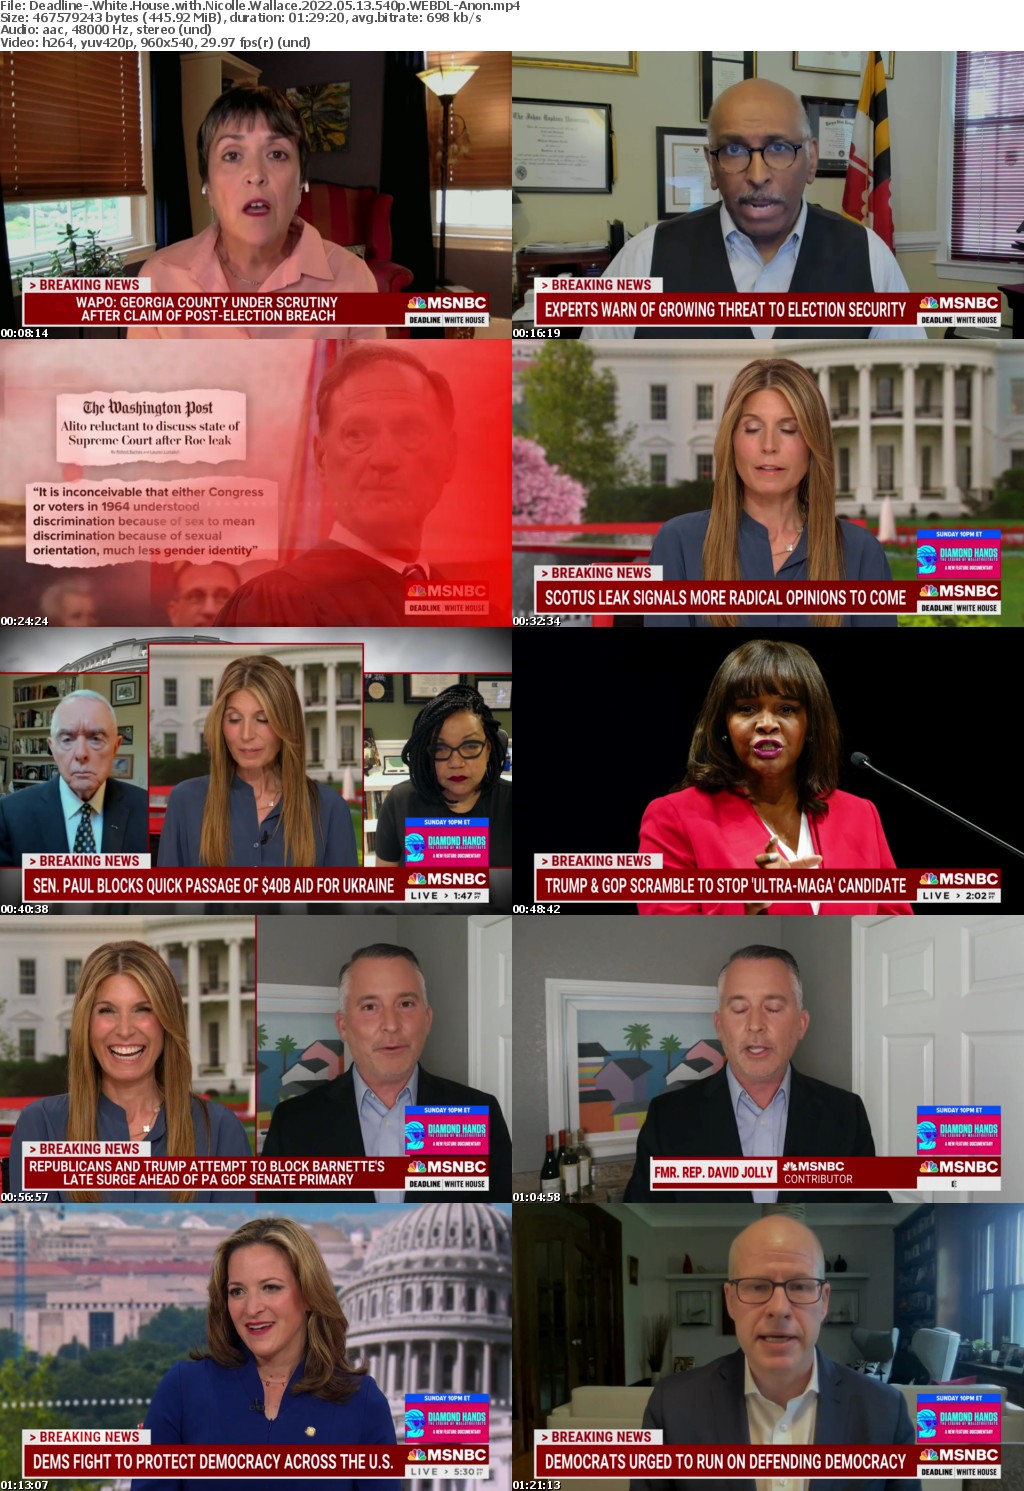 Deadline- White House with Nicolle Wallace 2022 05 13 540p WEBDL-Anon